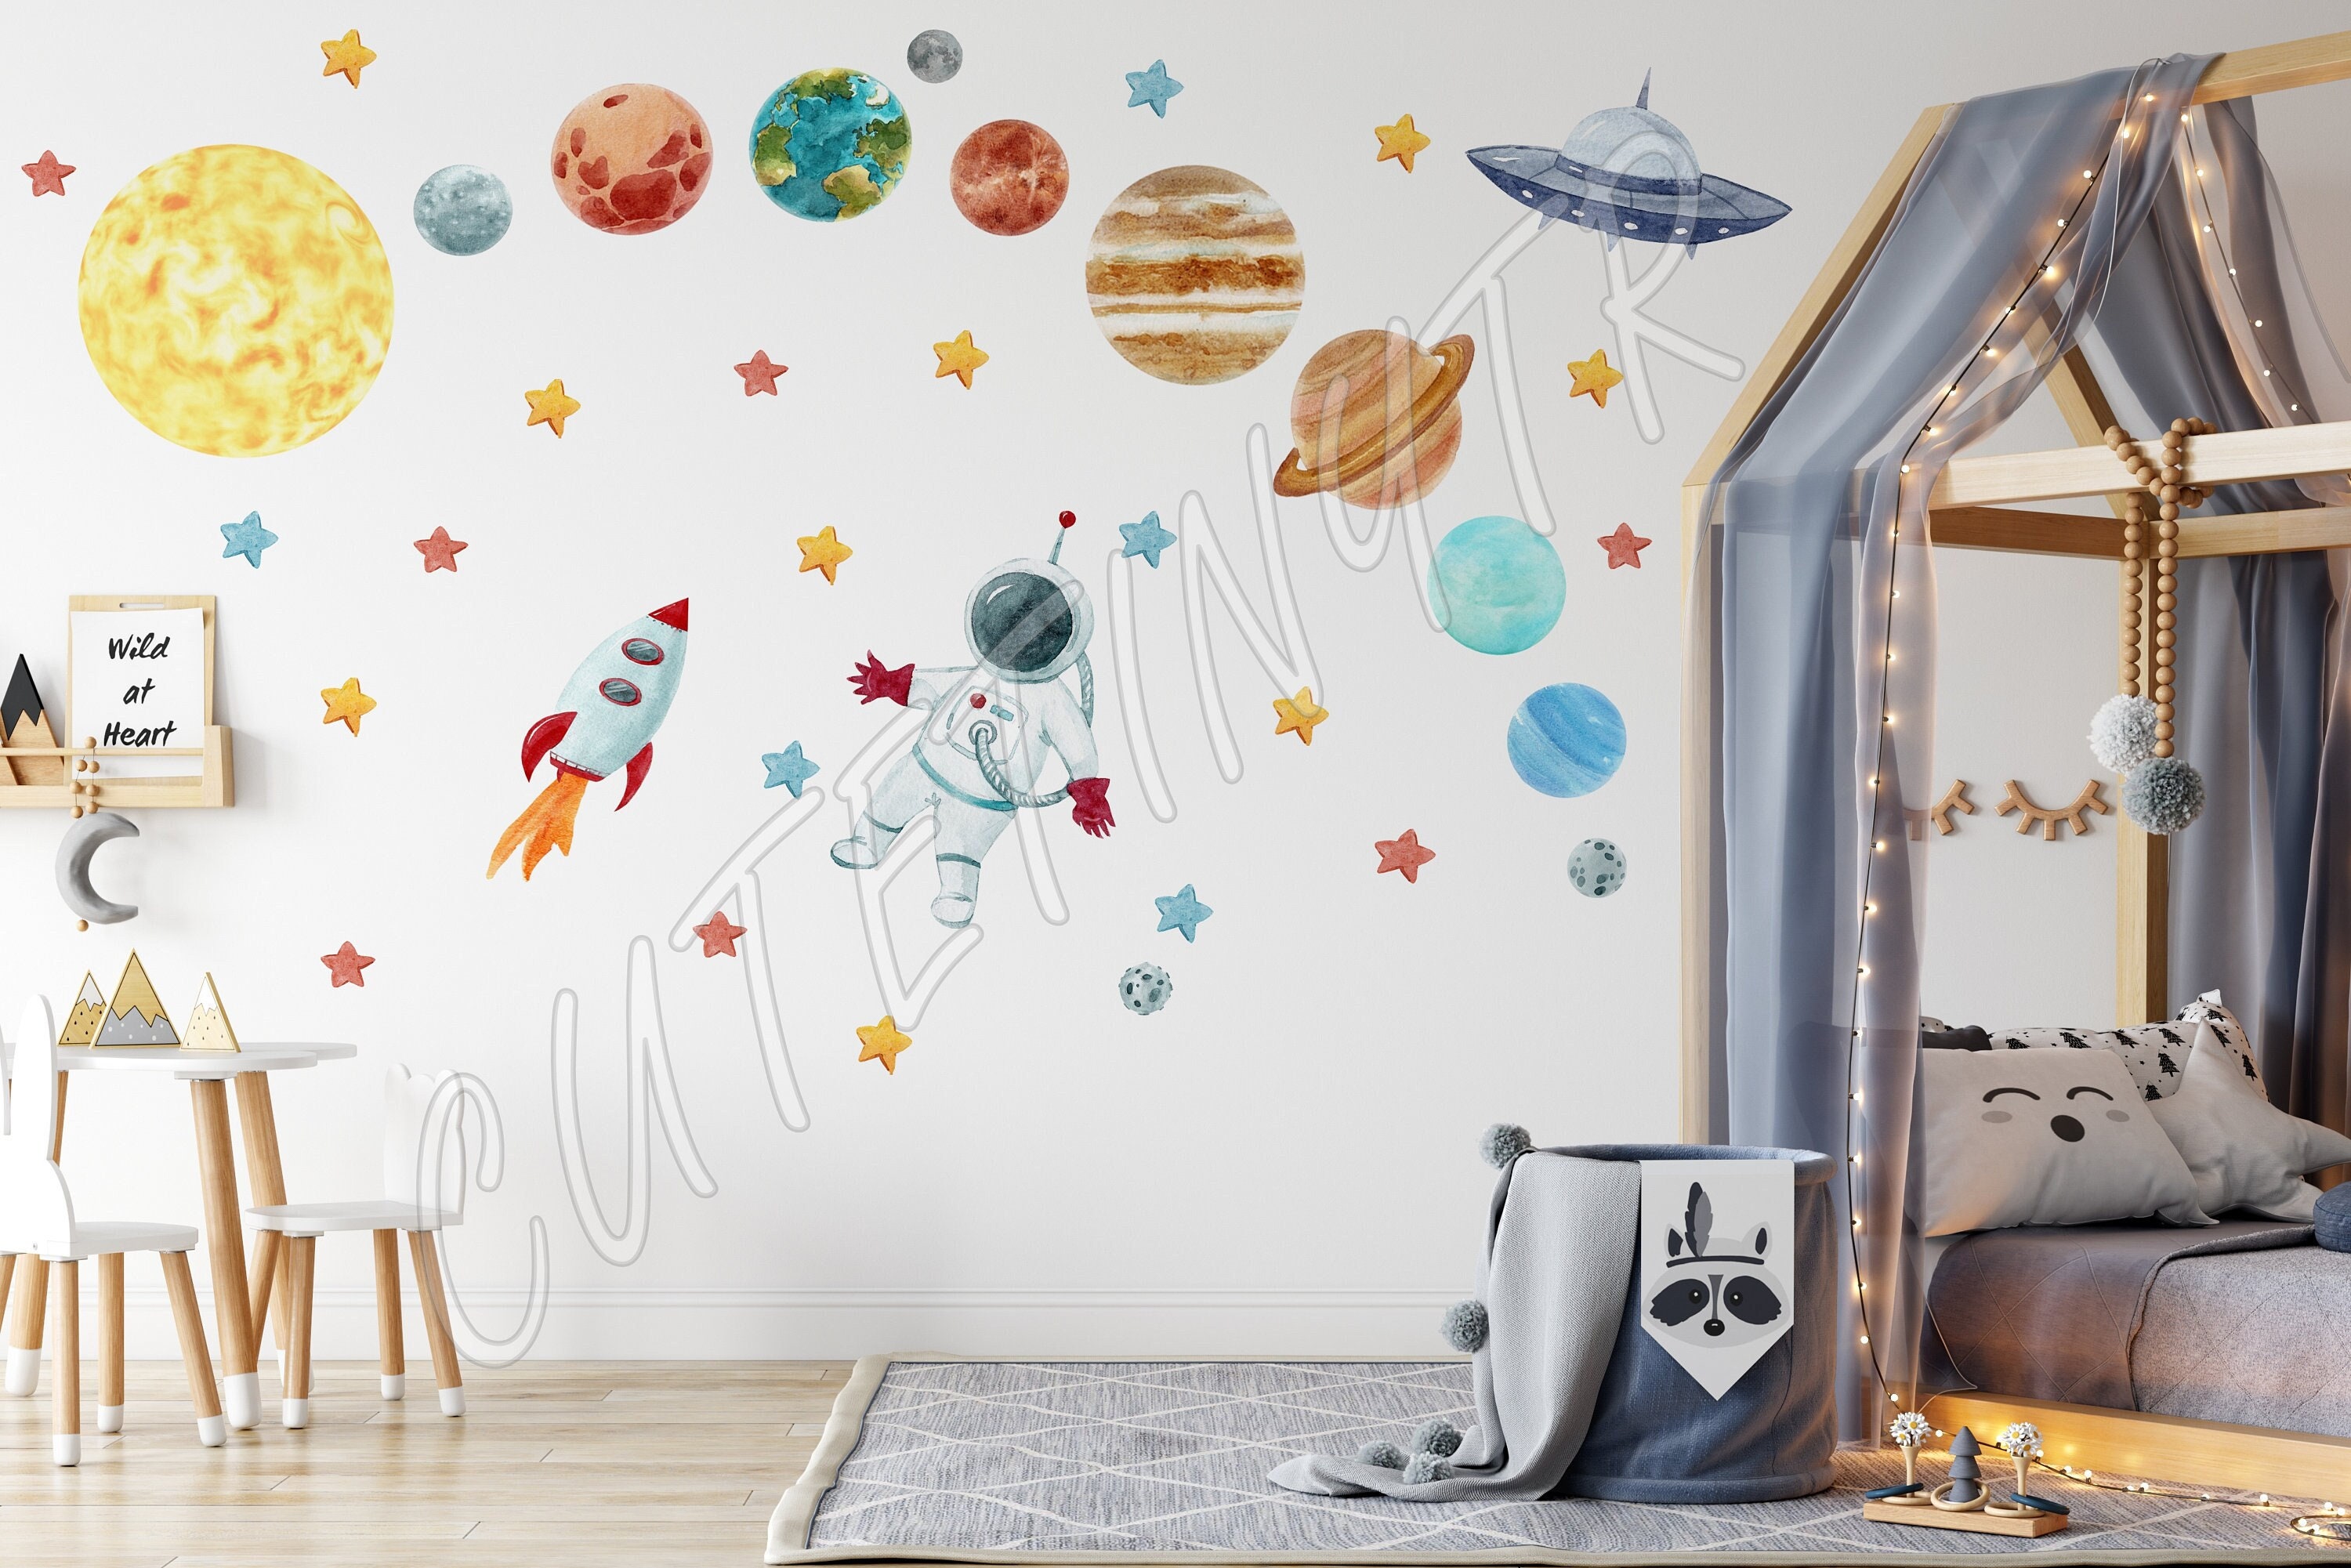 Watercolor Earth Wall Decal Removable Planet Space Sticker Childrens Room Decor 